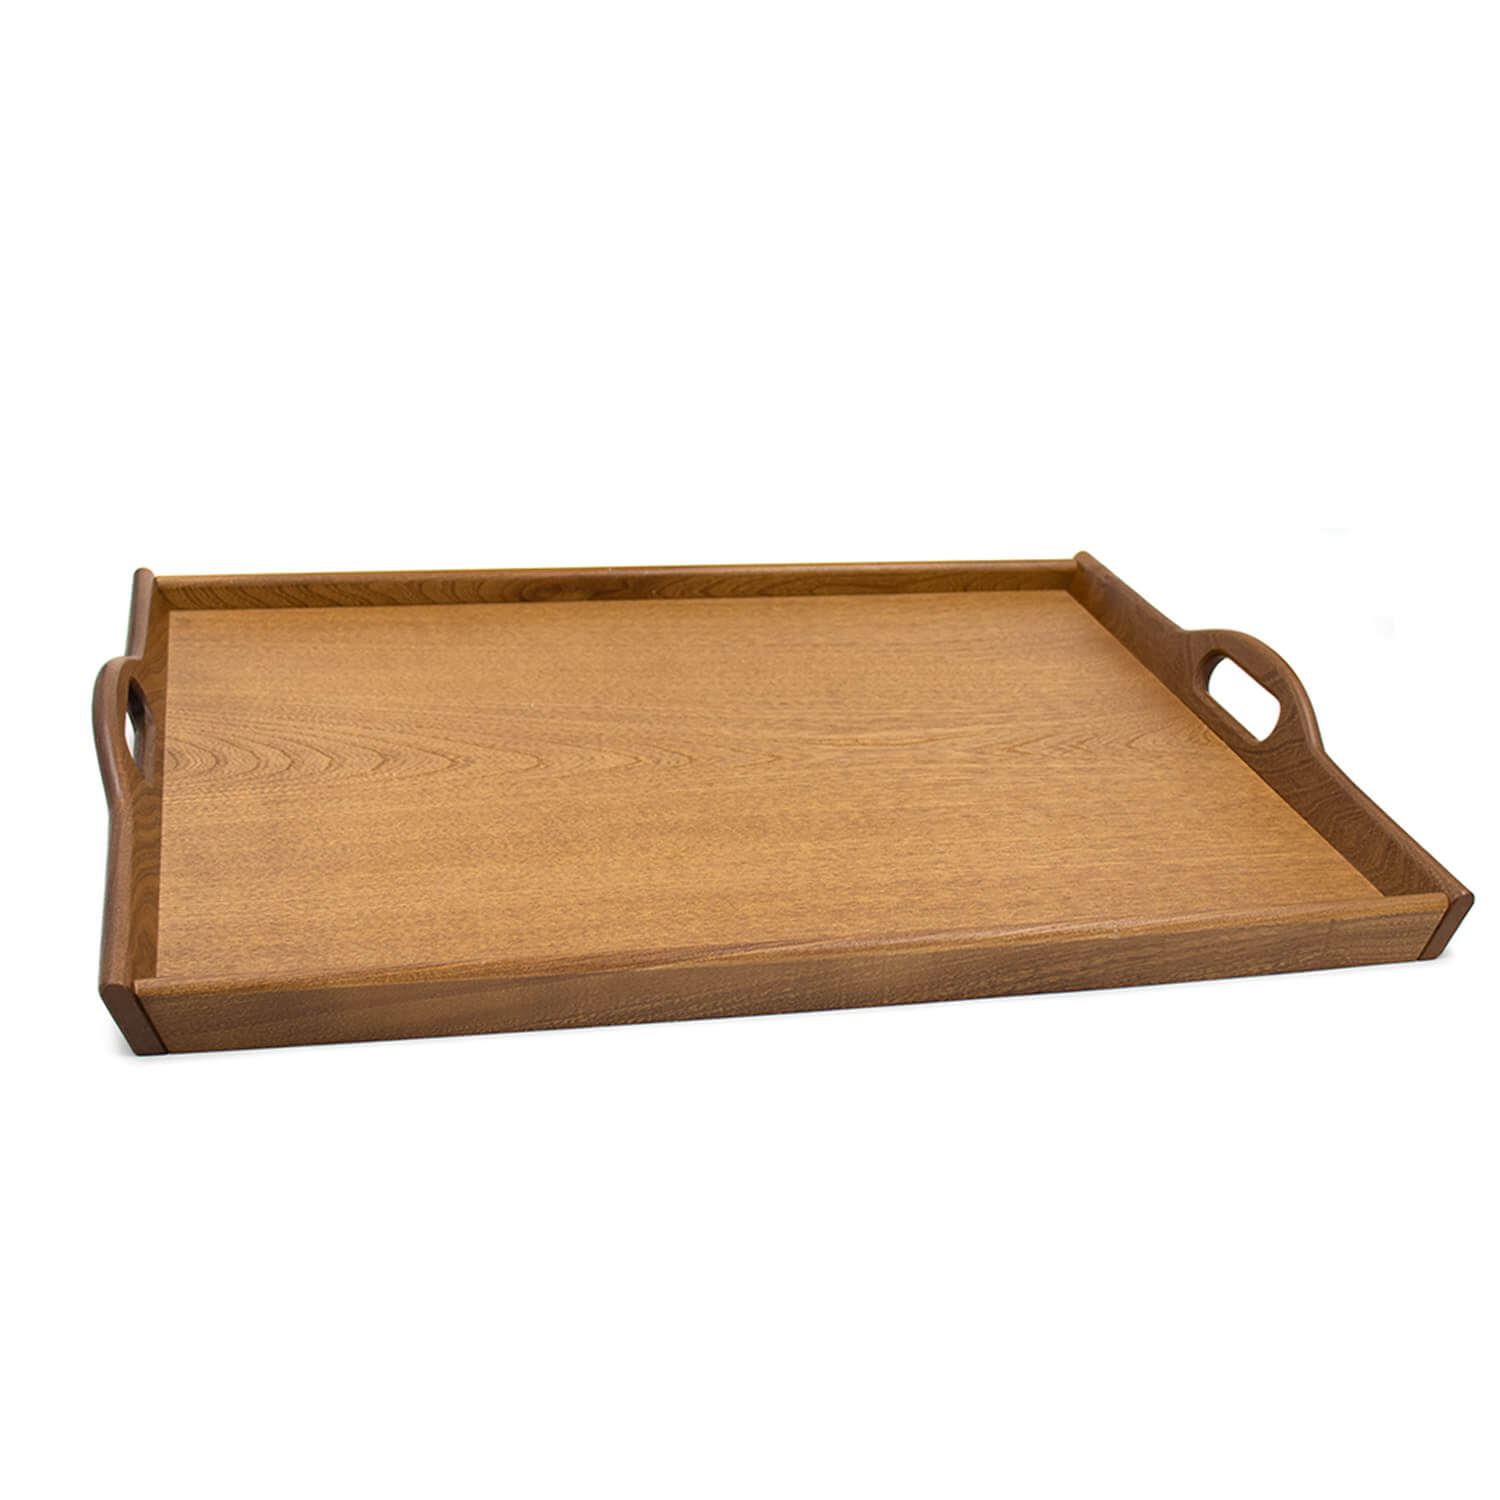 Large size tray with handle 595mm